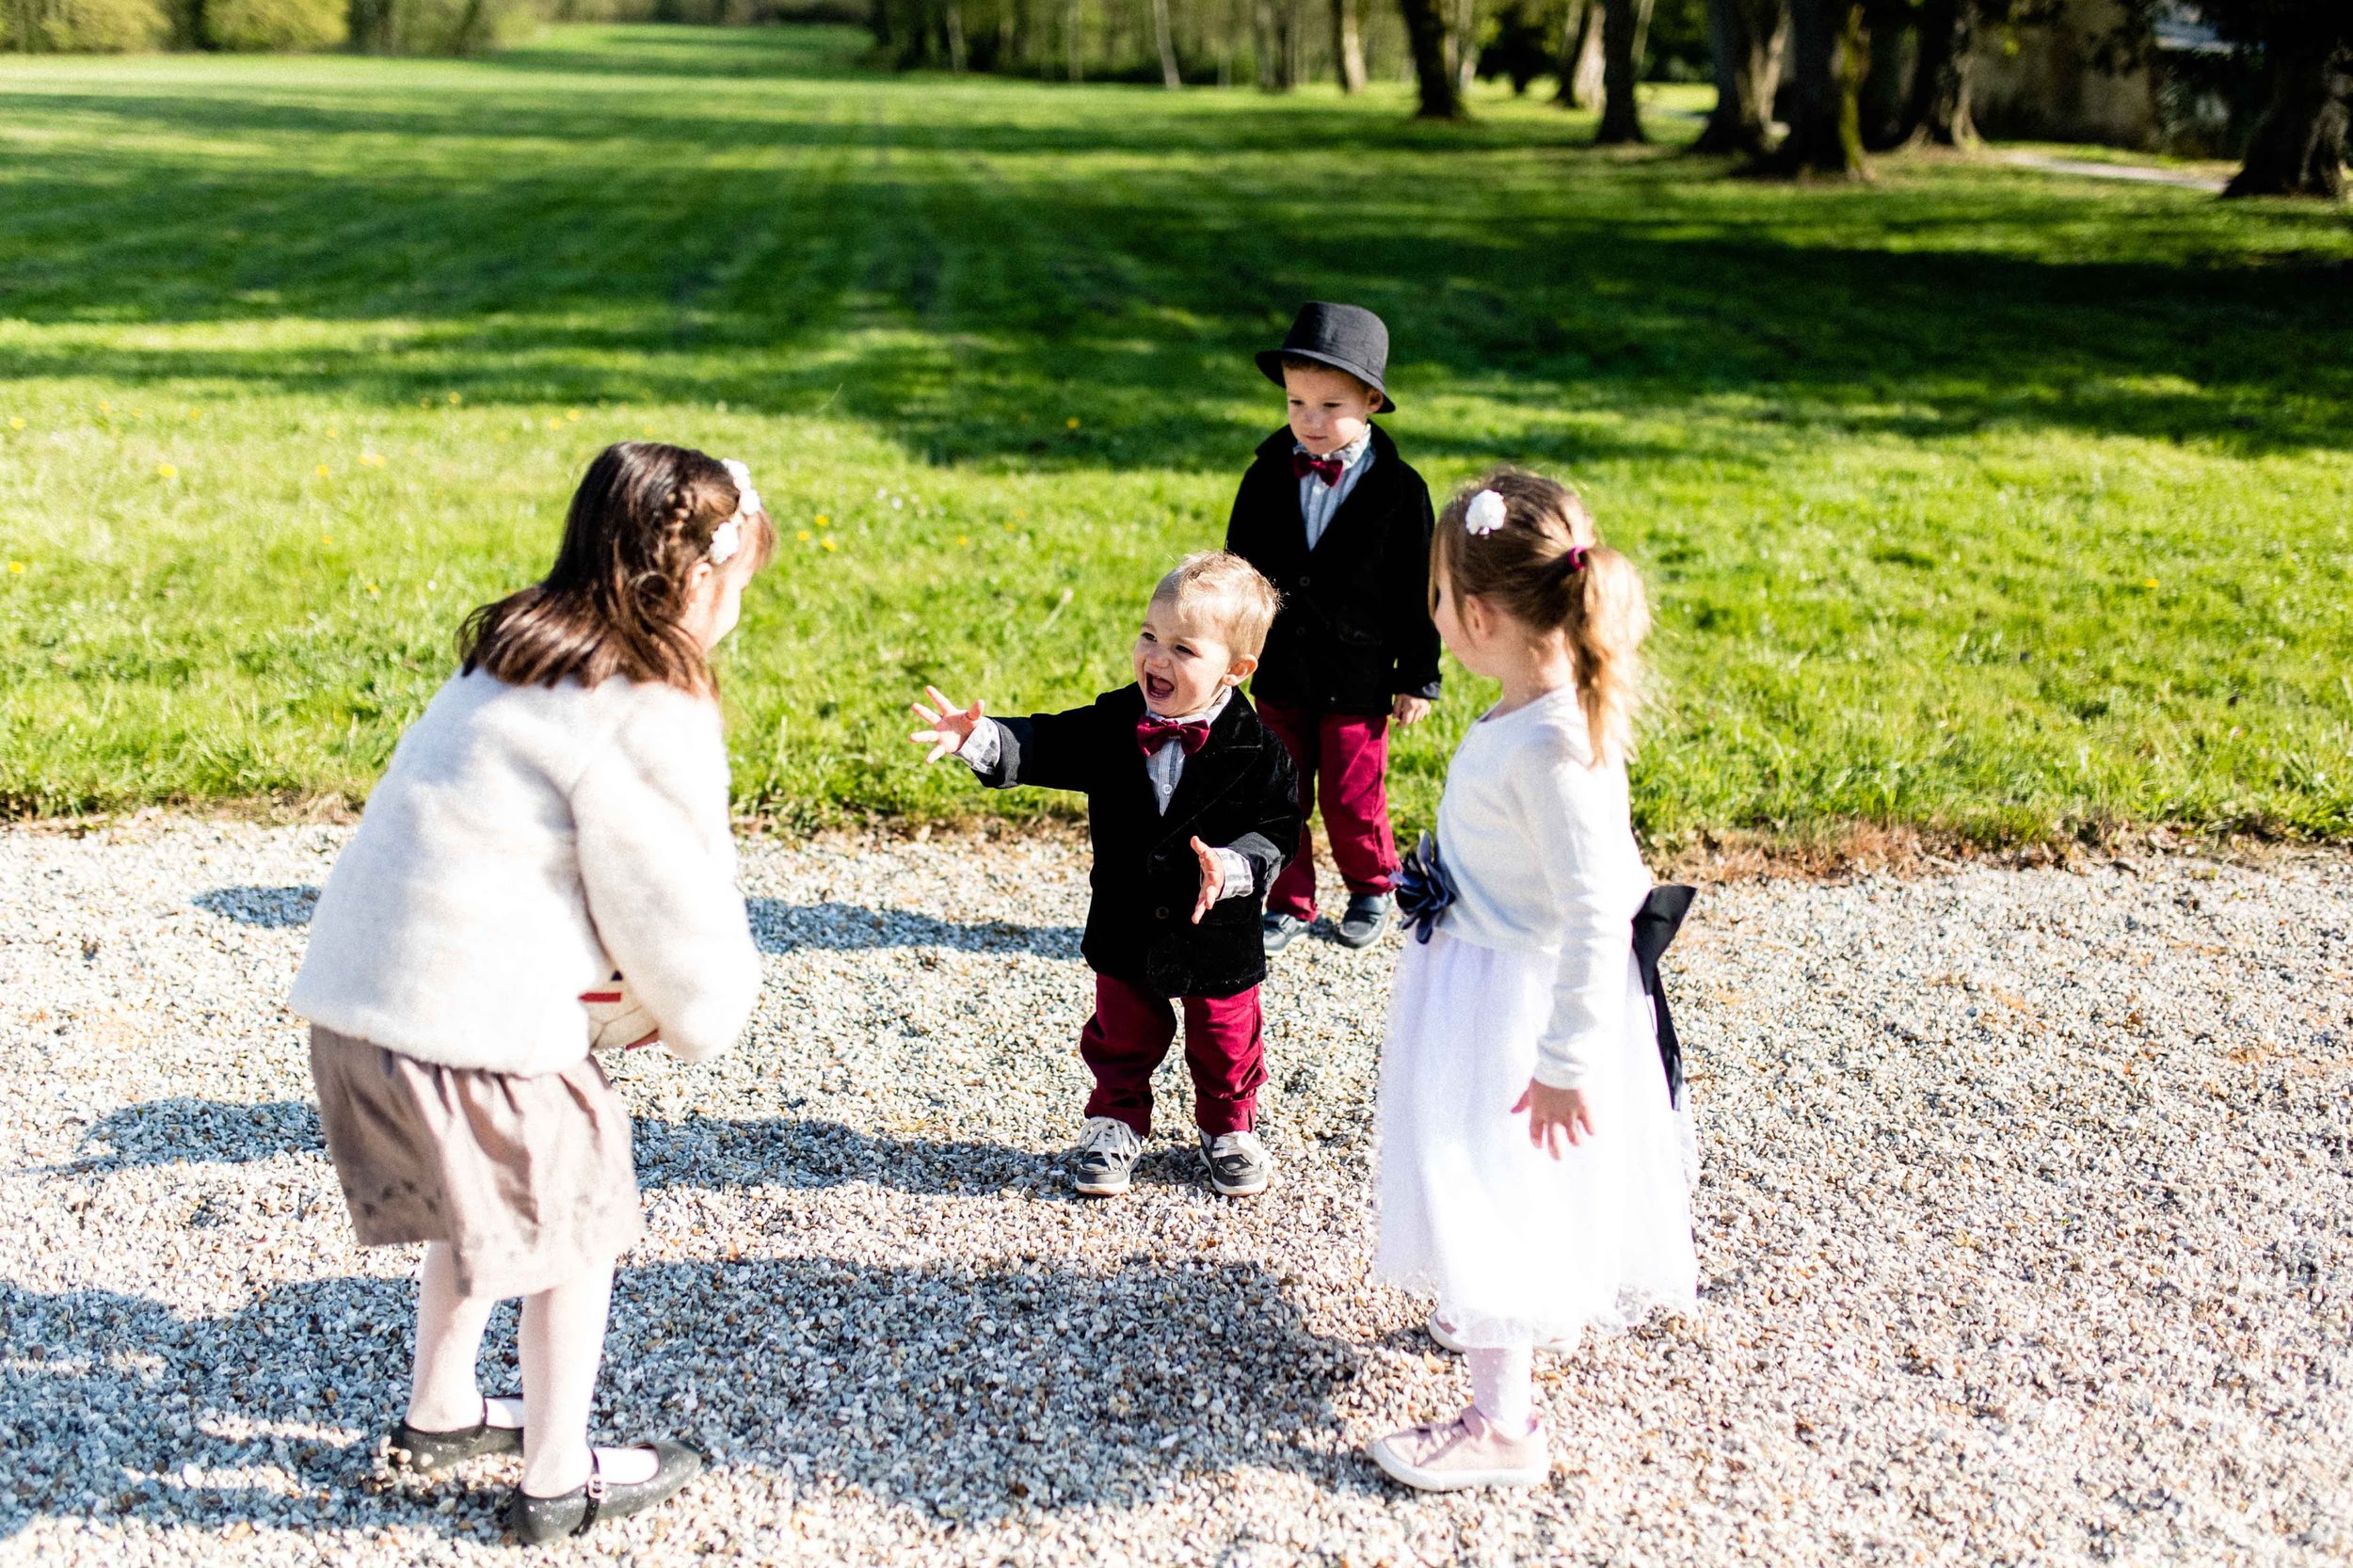 A group of boys and girls in little tuxedos and dresses playing on gravel during a celebration at the chateau.